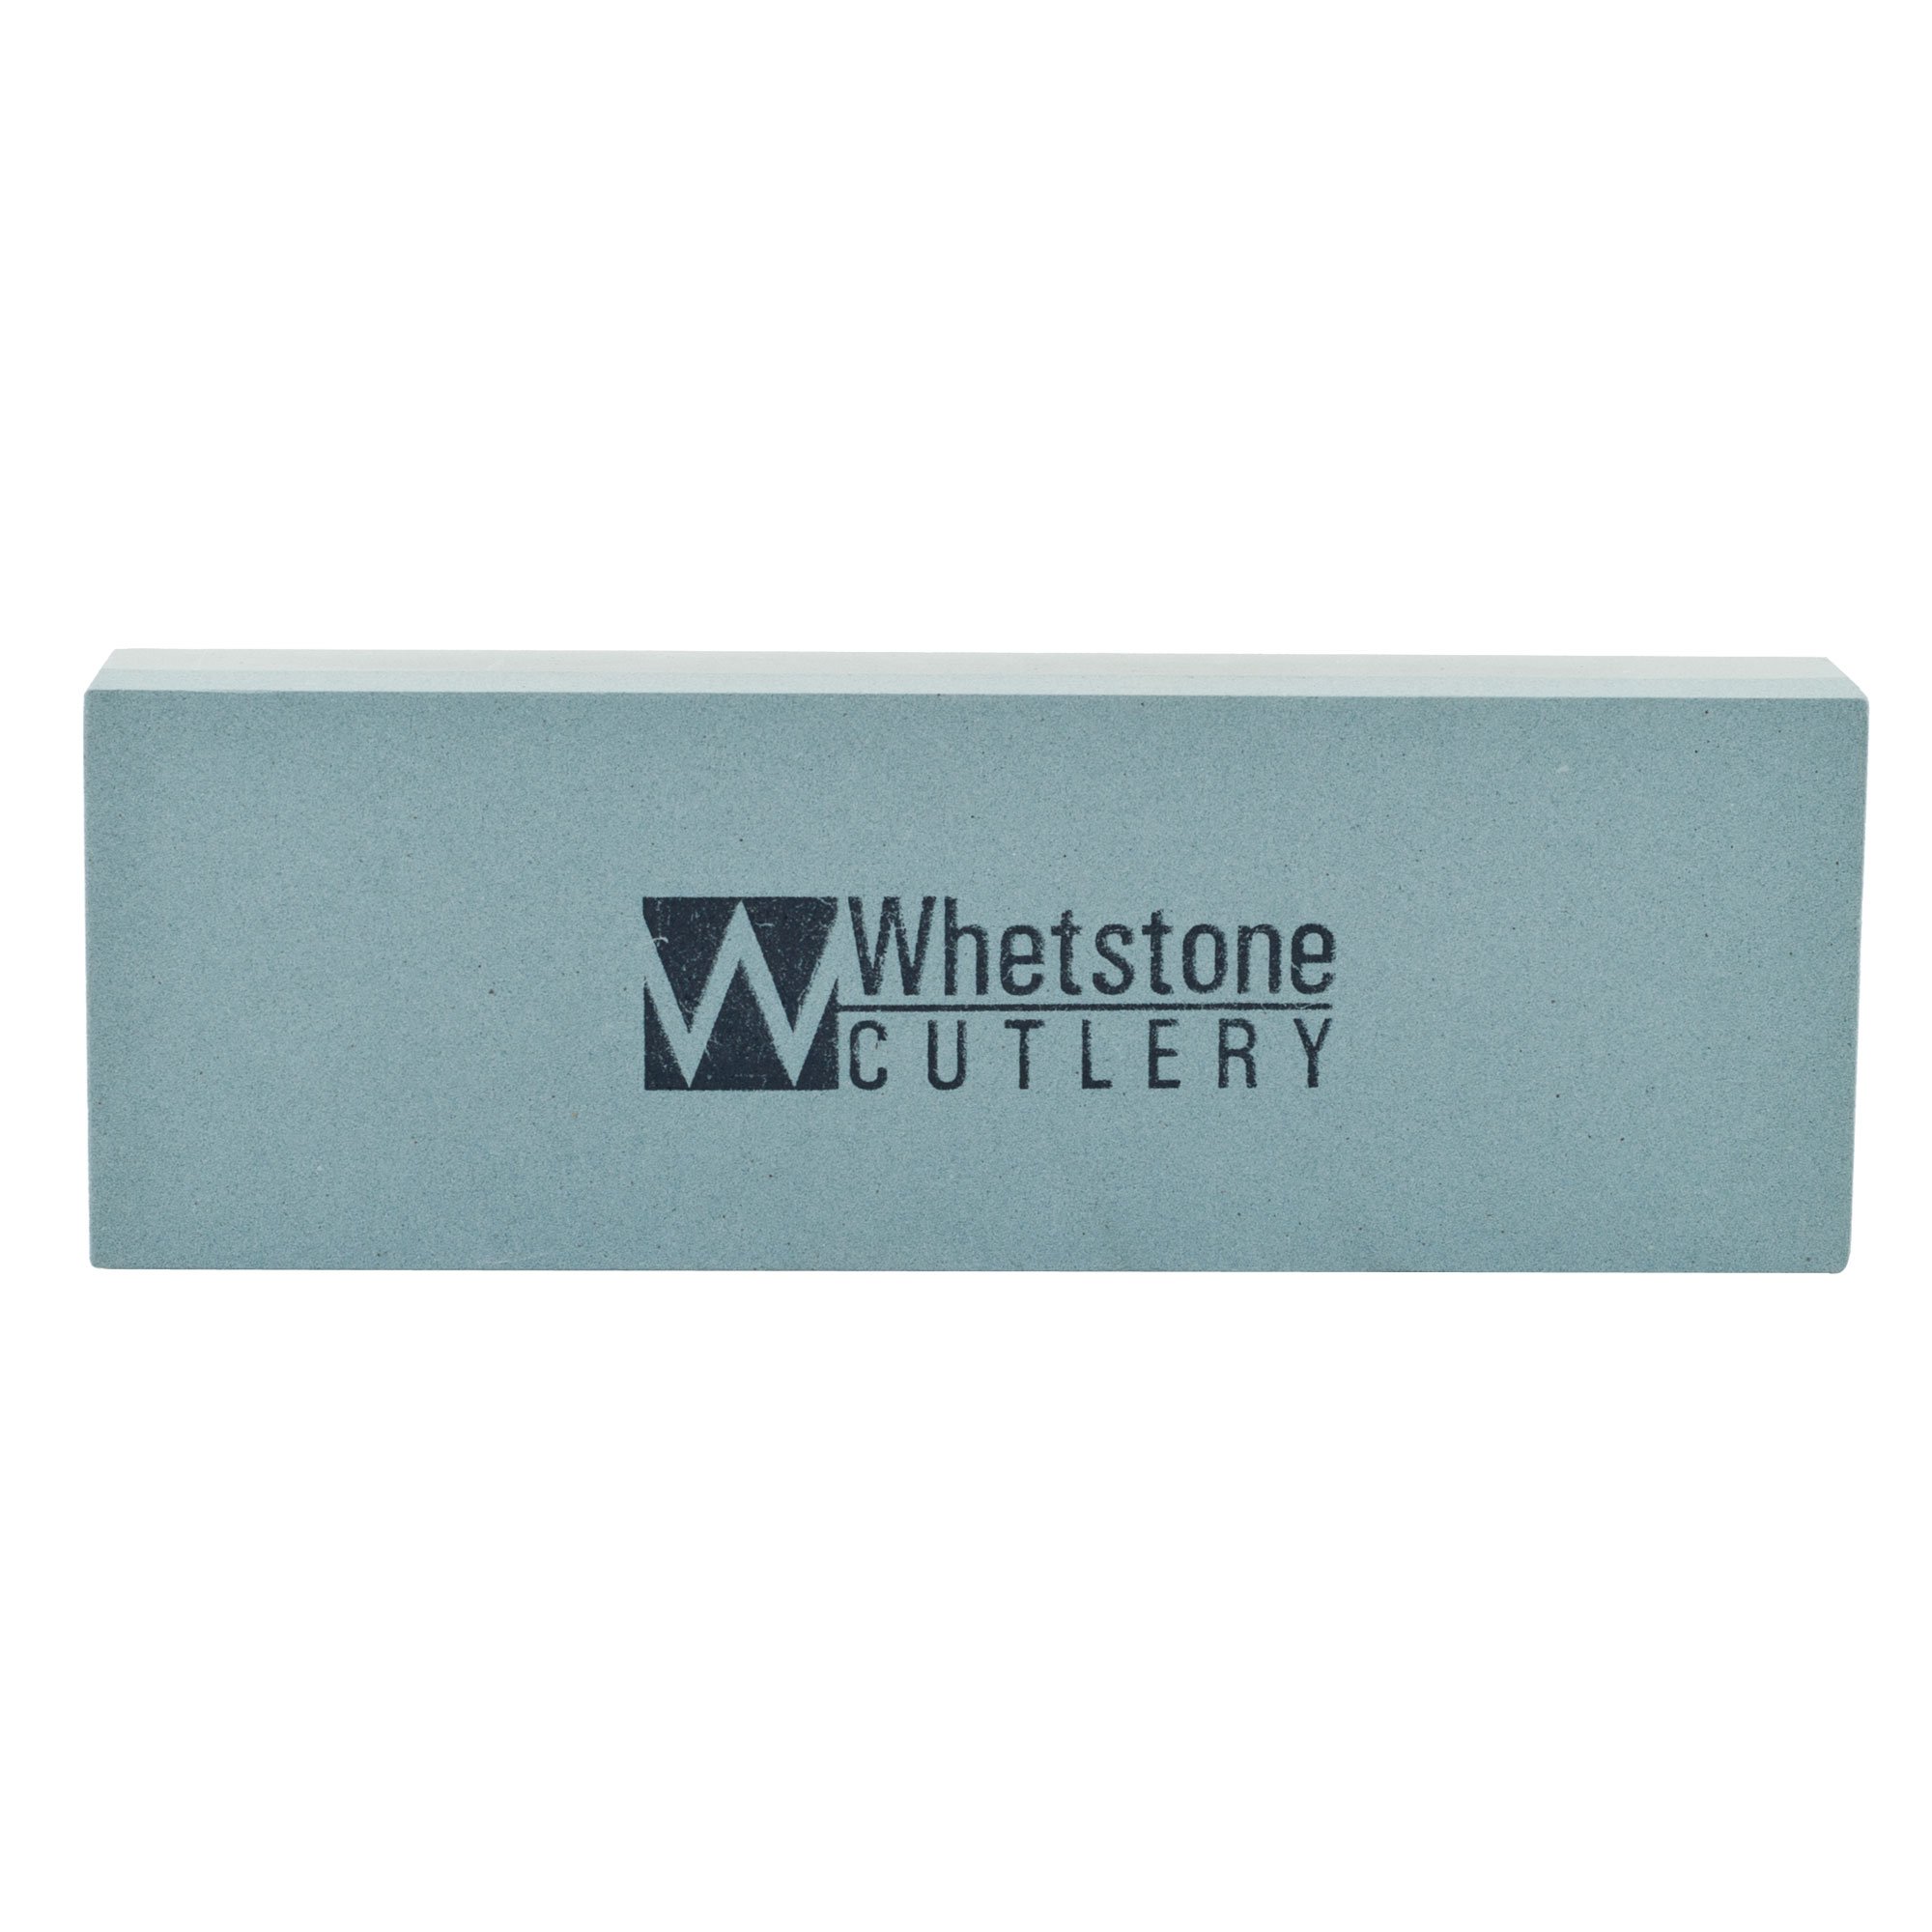 Whetstone Cutlery Sided, Gray Knife Stone-Dual 400/1000 Grit Wet Block-Sharpens and Polishes Sharp Tools and Kitchen, Hunting, and Pocket Knives by Whetstone, 1-Pack, Limestone